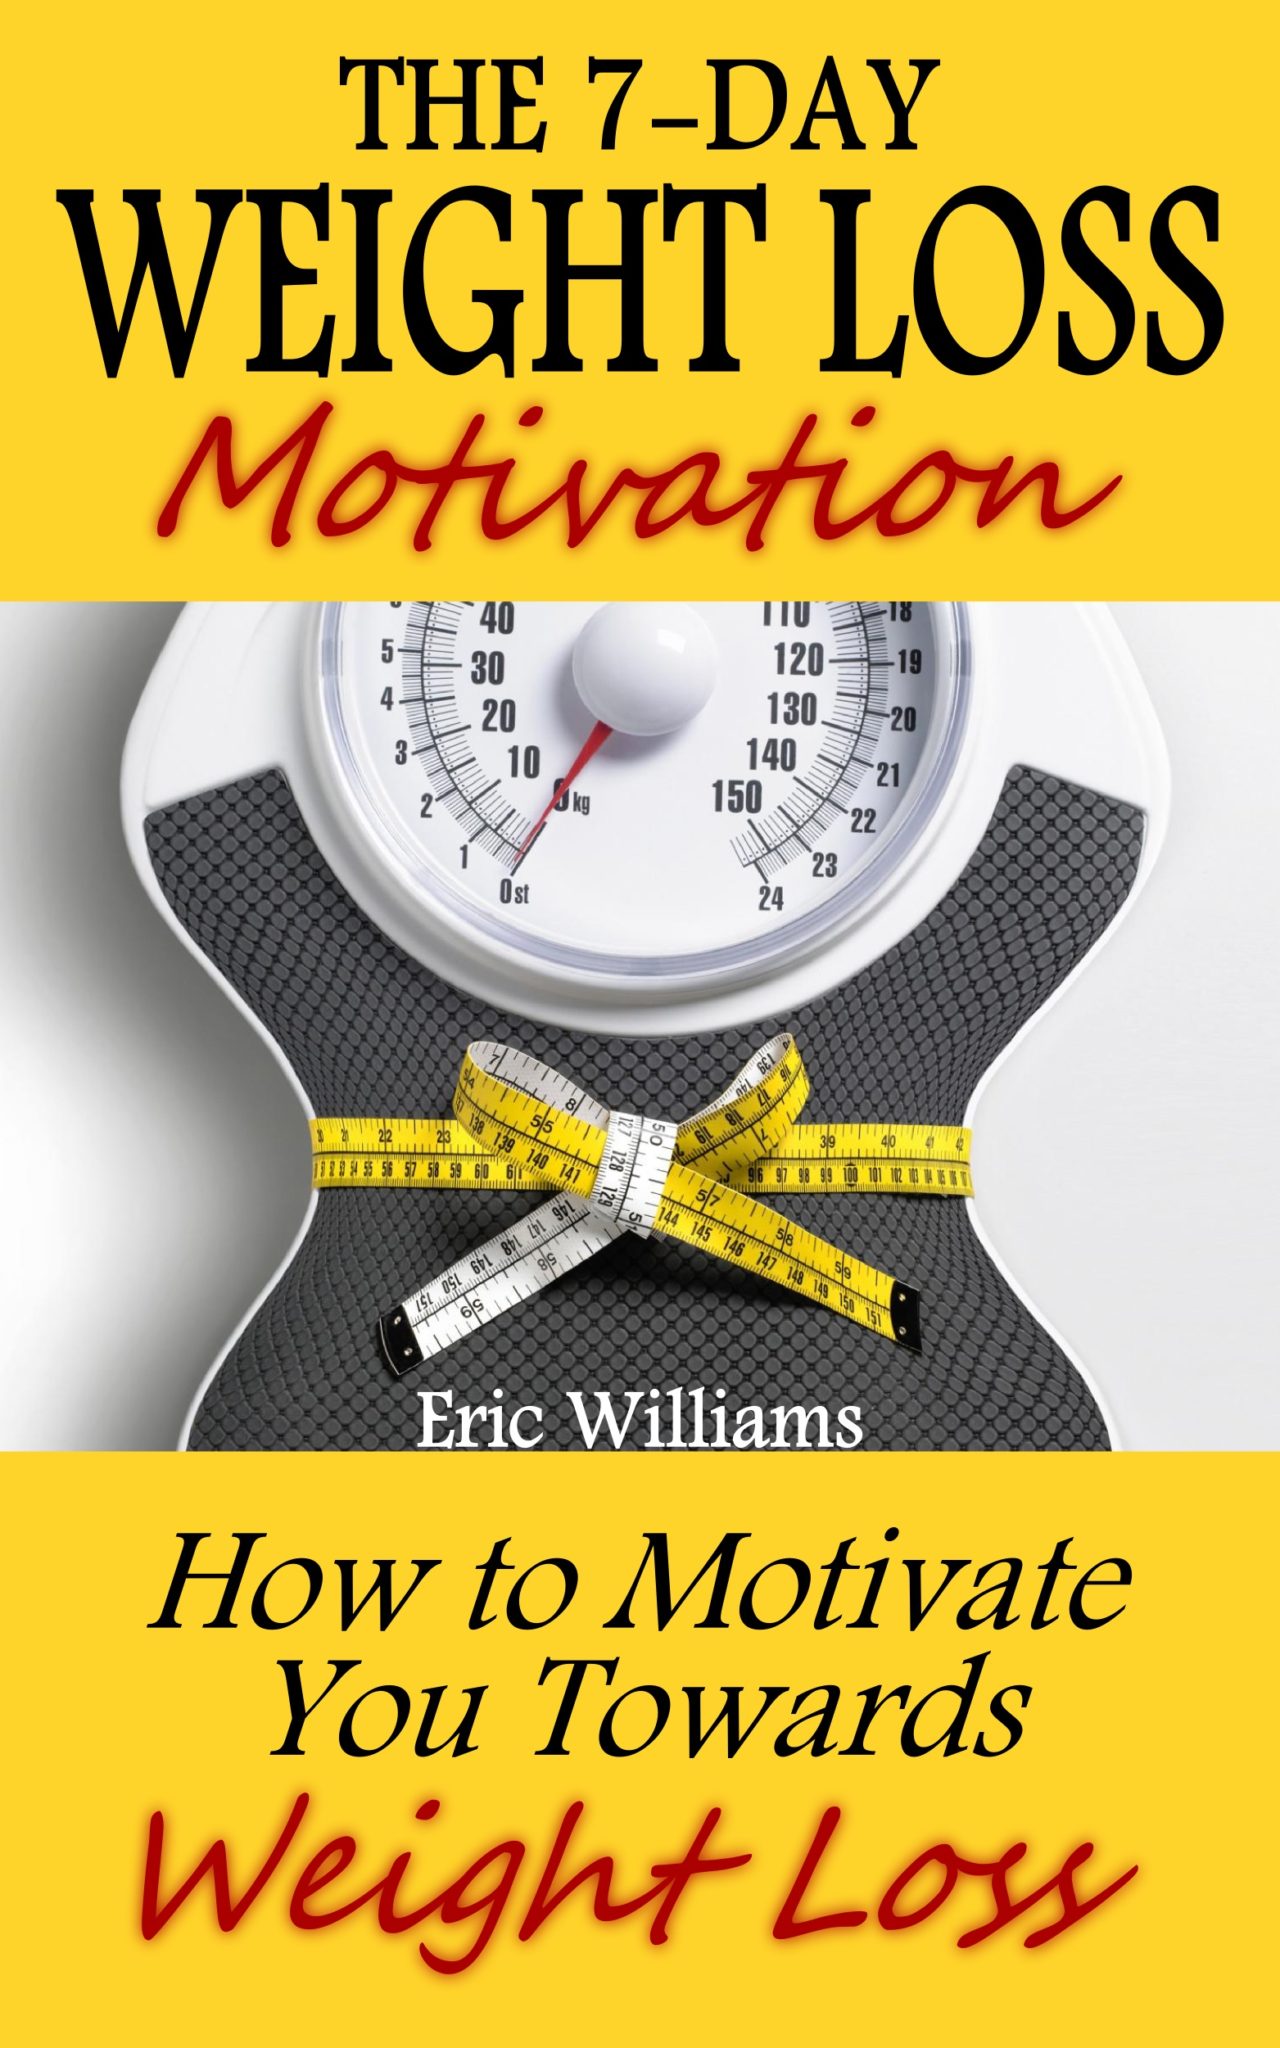 FREE: The 7-Day Weight Loss Motivation: How to Motivate You Towards Weight Loss by Eric Williams